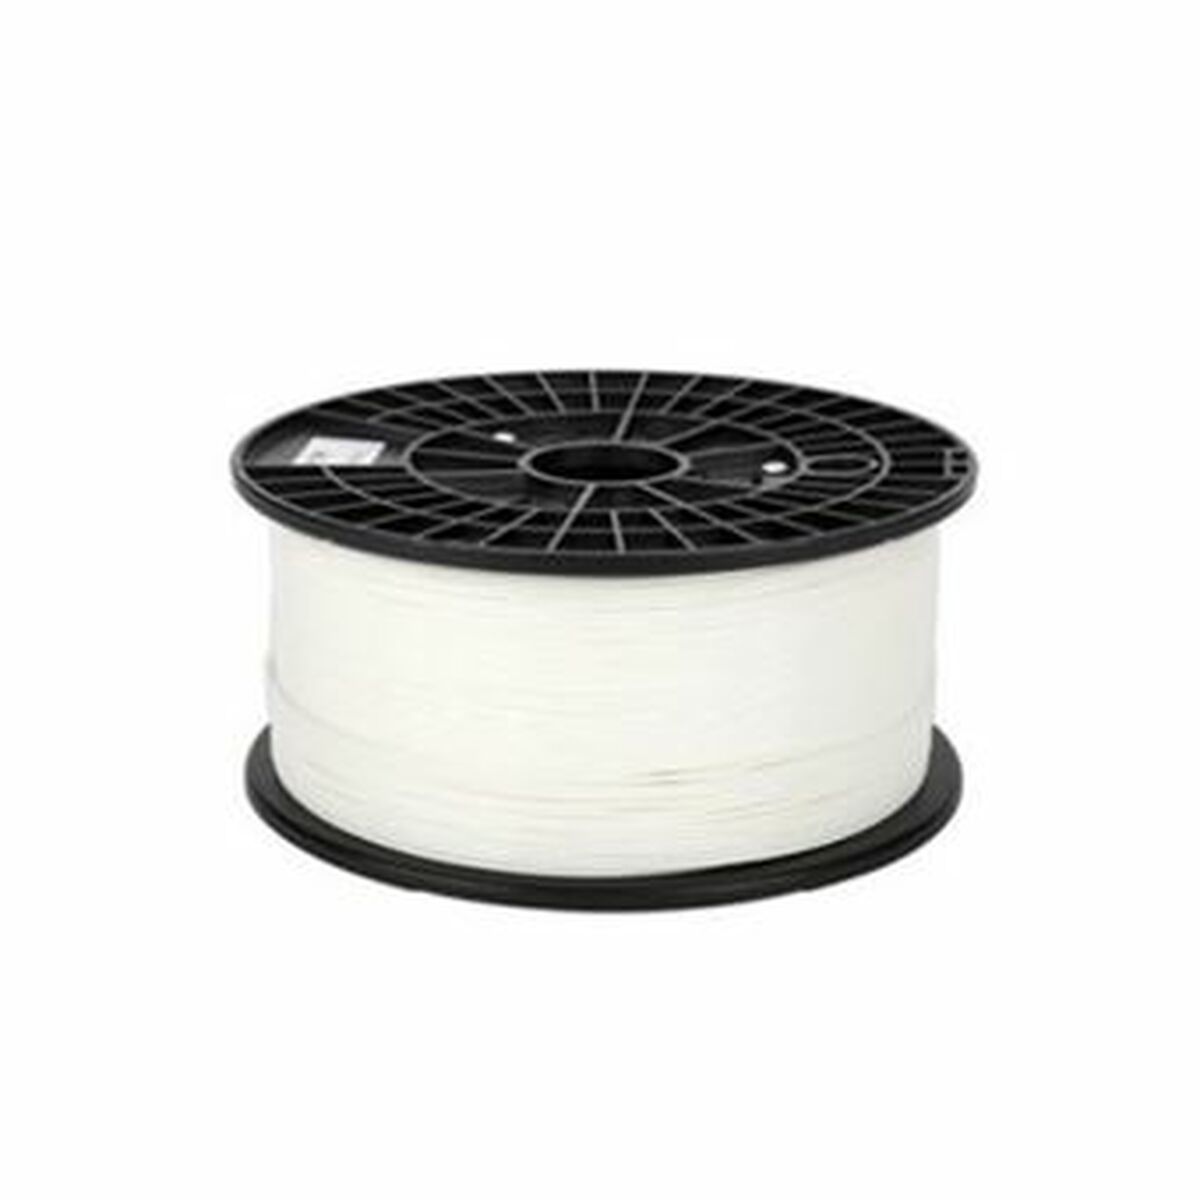 Filament Reel CoLiDo 3D-Gold White 1,75 mm